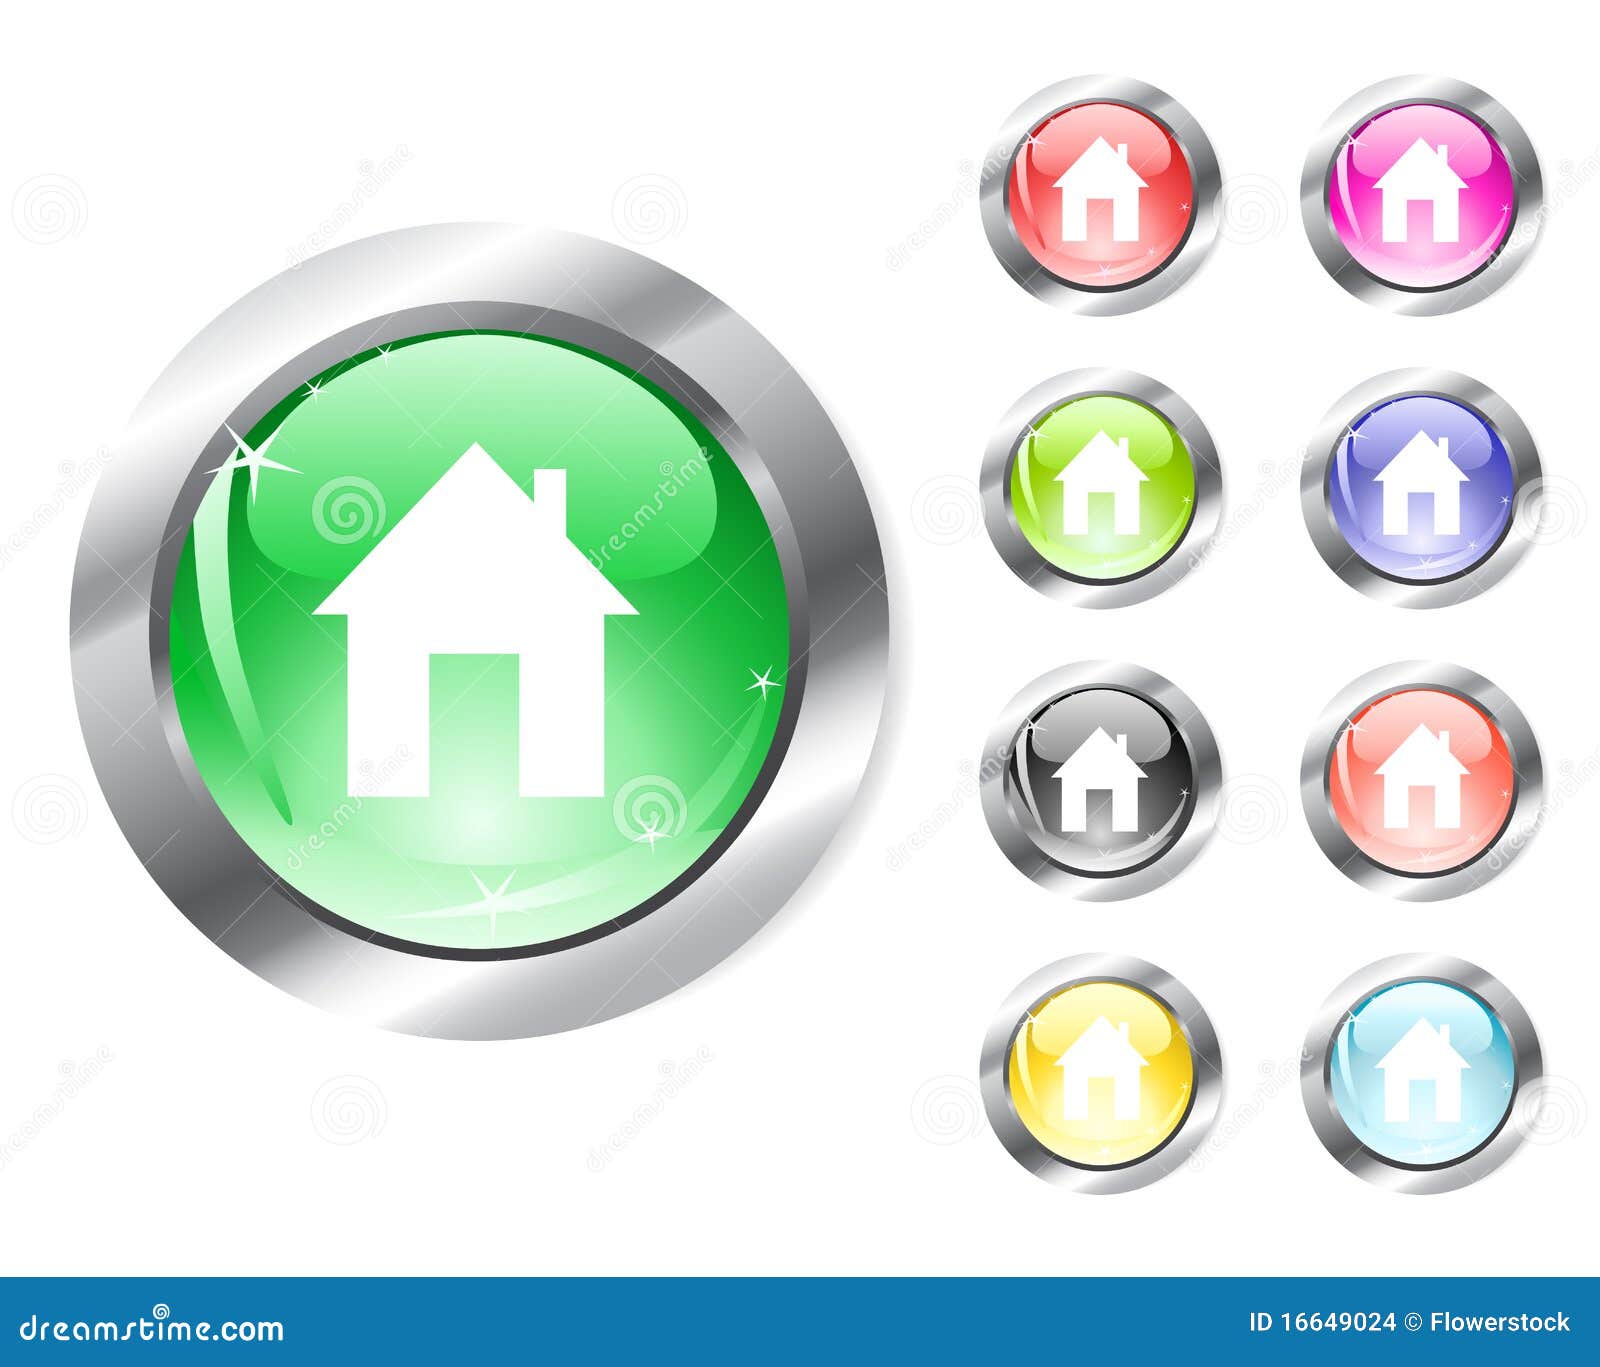 Web Home Icon Stock Images - Image: 16649024